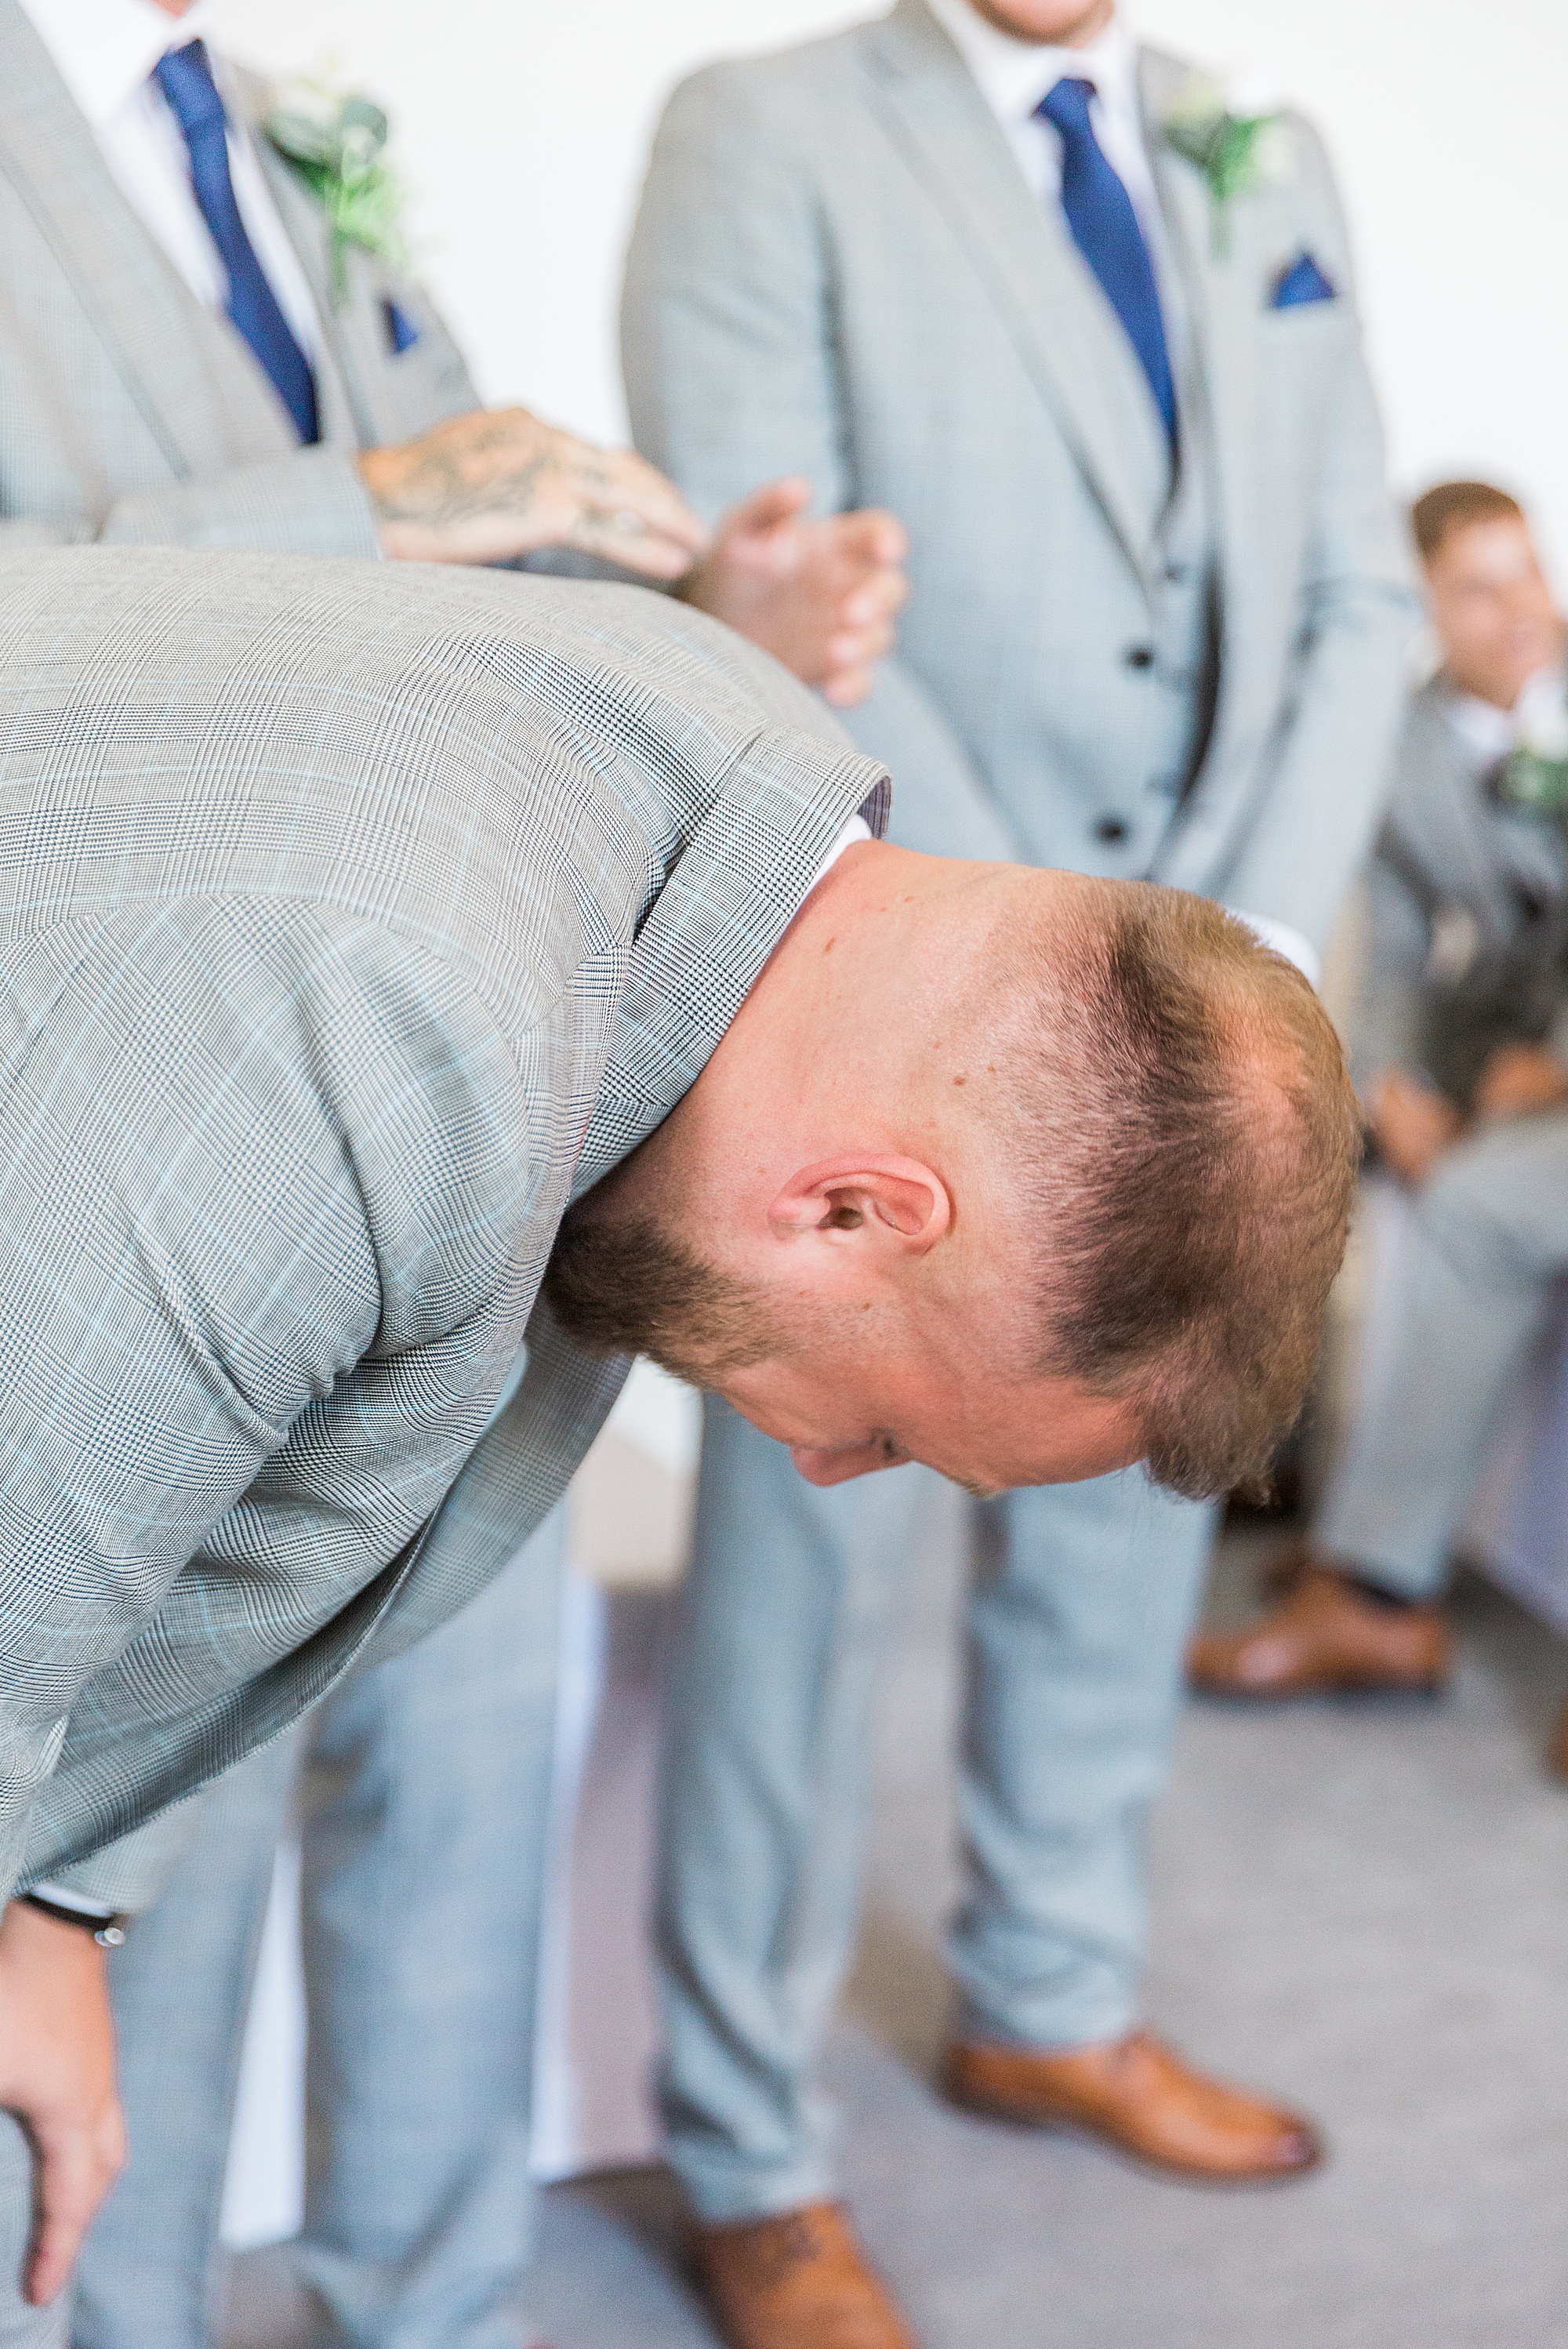 photo of a groom's reaction at the start of his wedding, the groom is bent over towards the floor with emotion